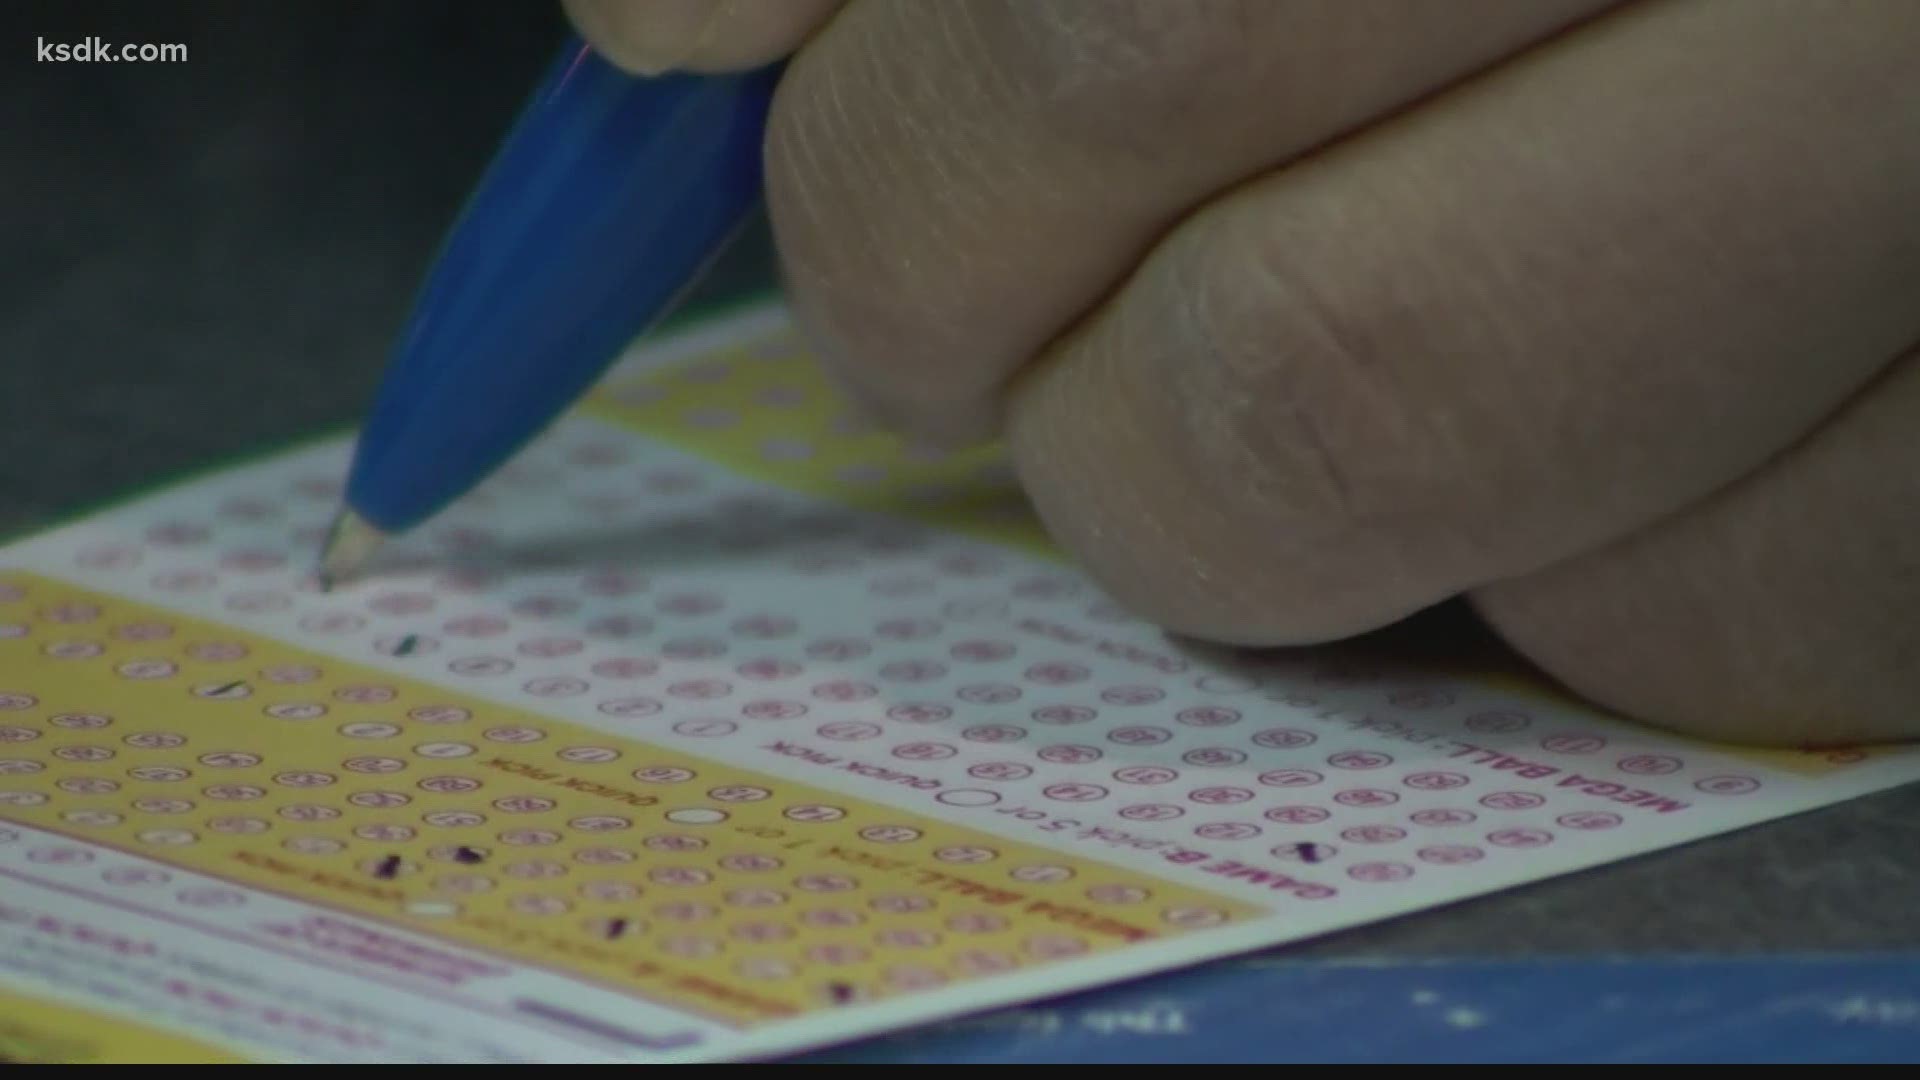 The mega millions drawing is Tuesday night